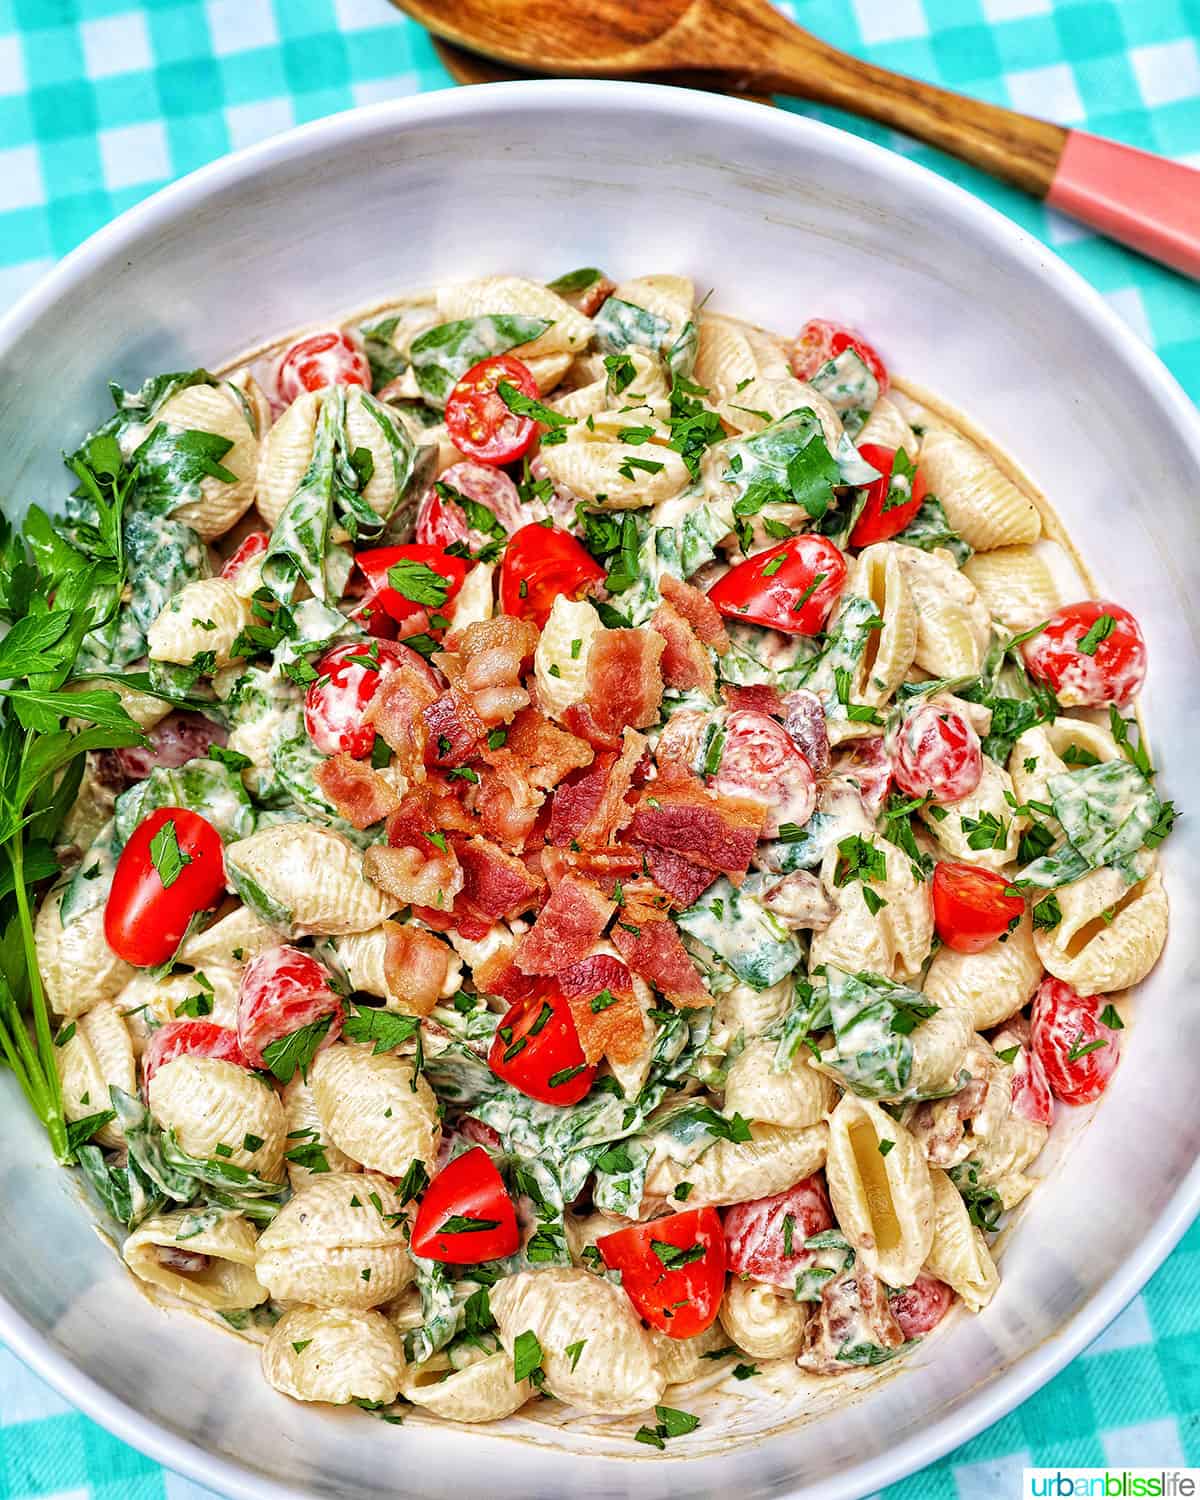 BLT pasta salad in a white bowl with wooden serving spoons overhead on an aqua checkered tablecloth.